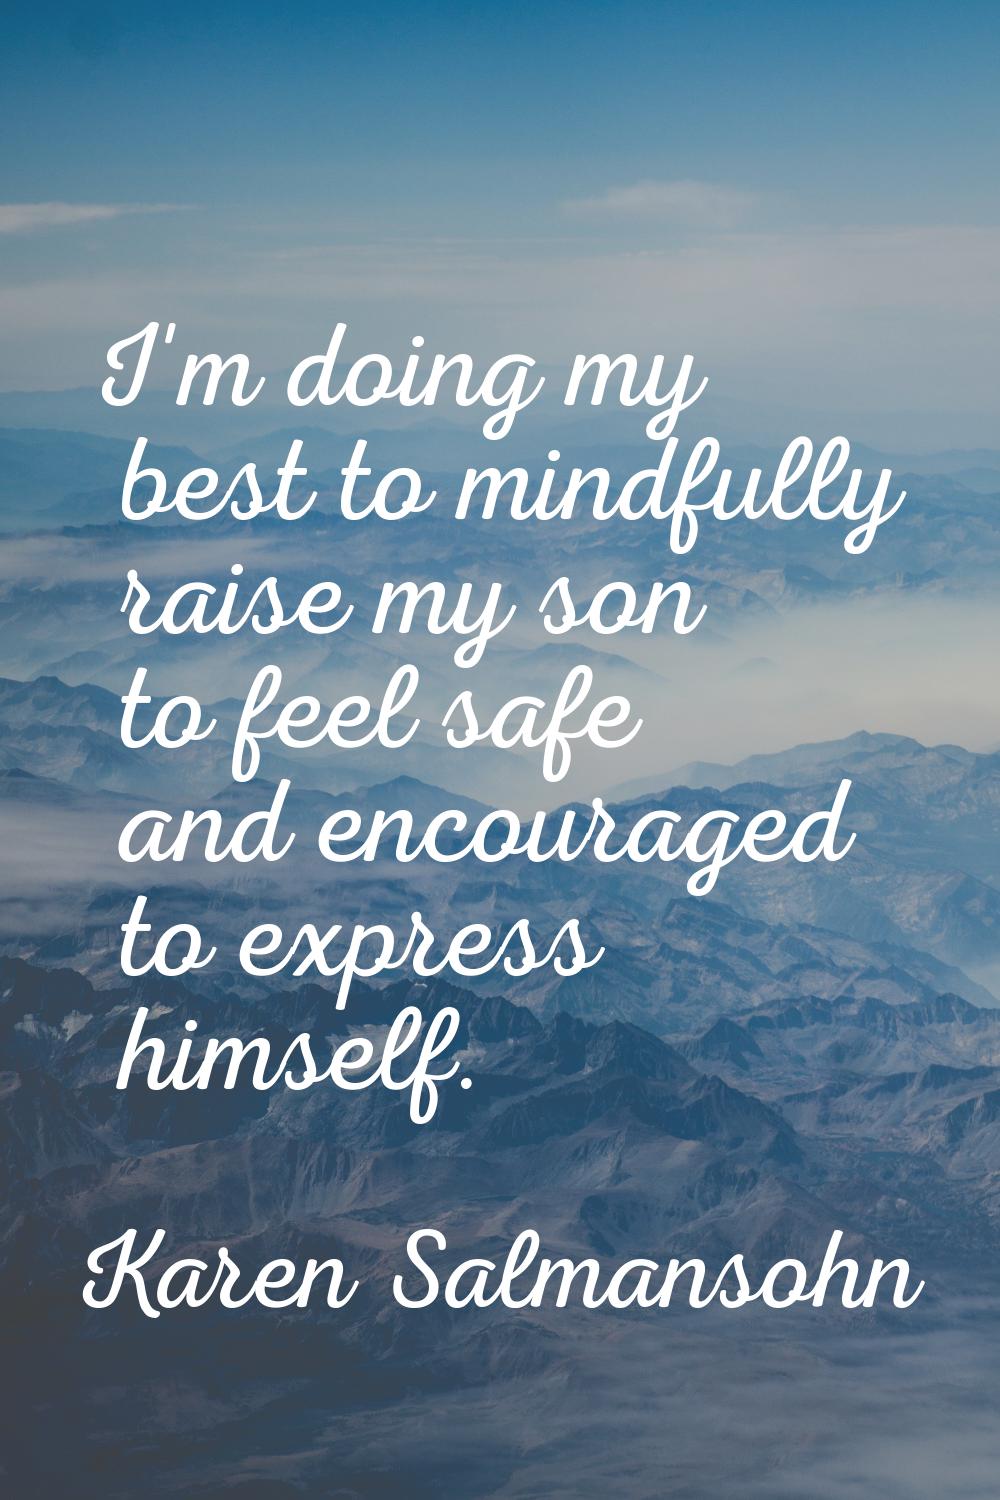 I'm doing my best to mindfully raise my son to feel safe and encouraged to express himself.